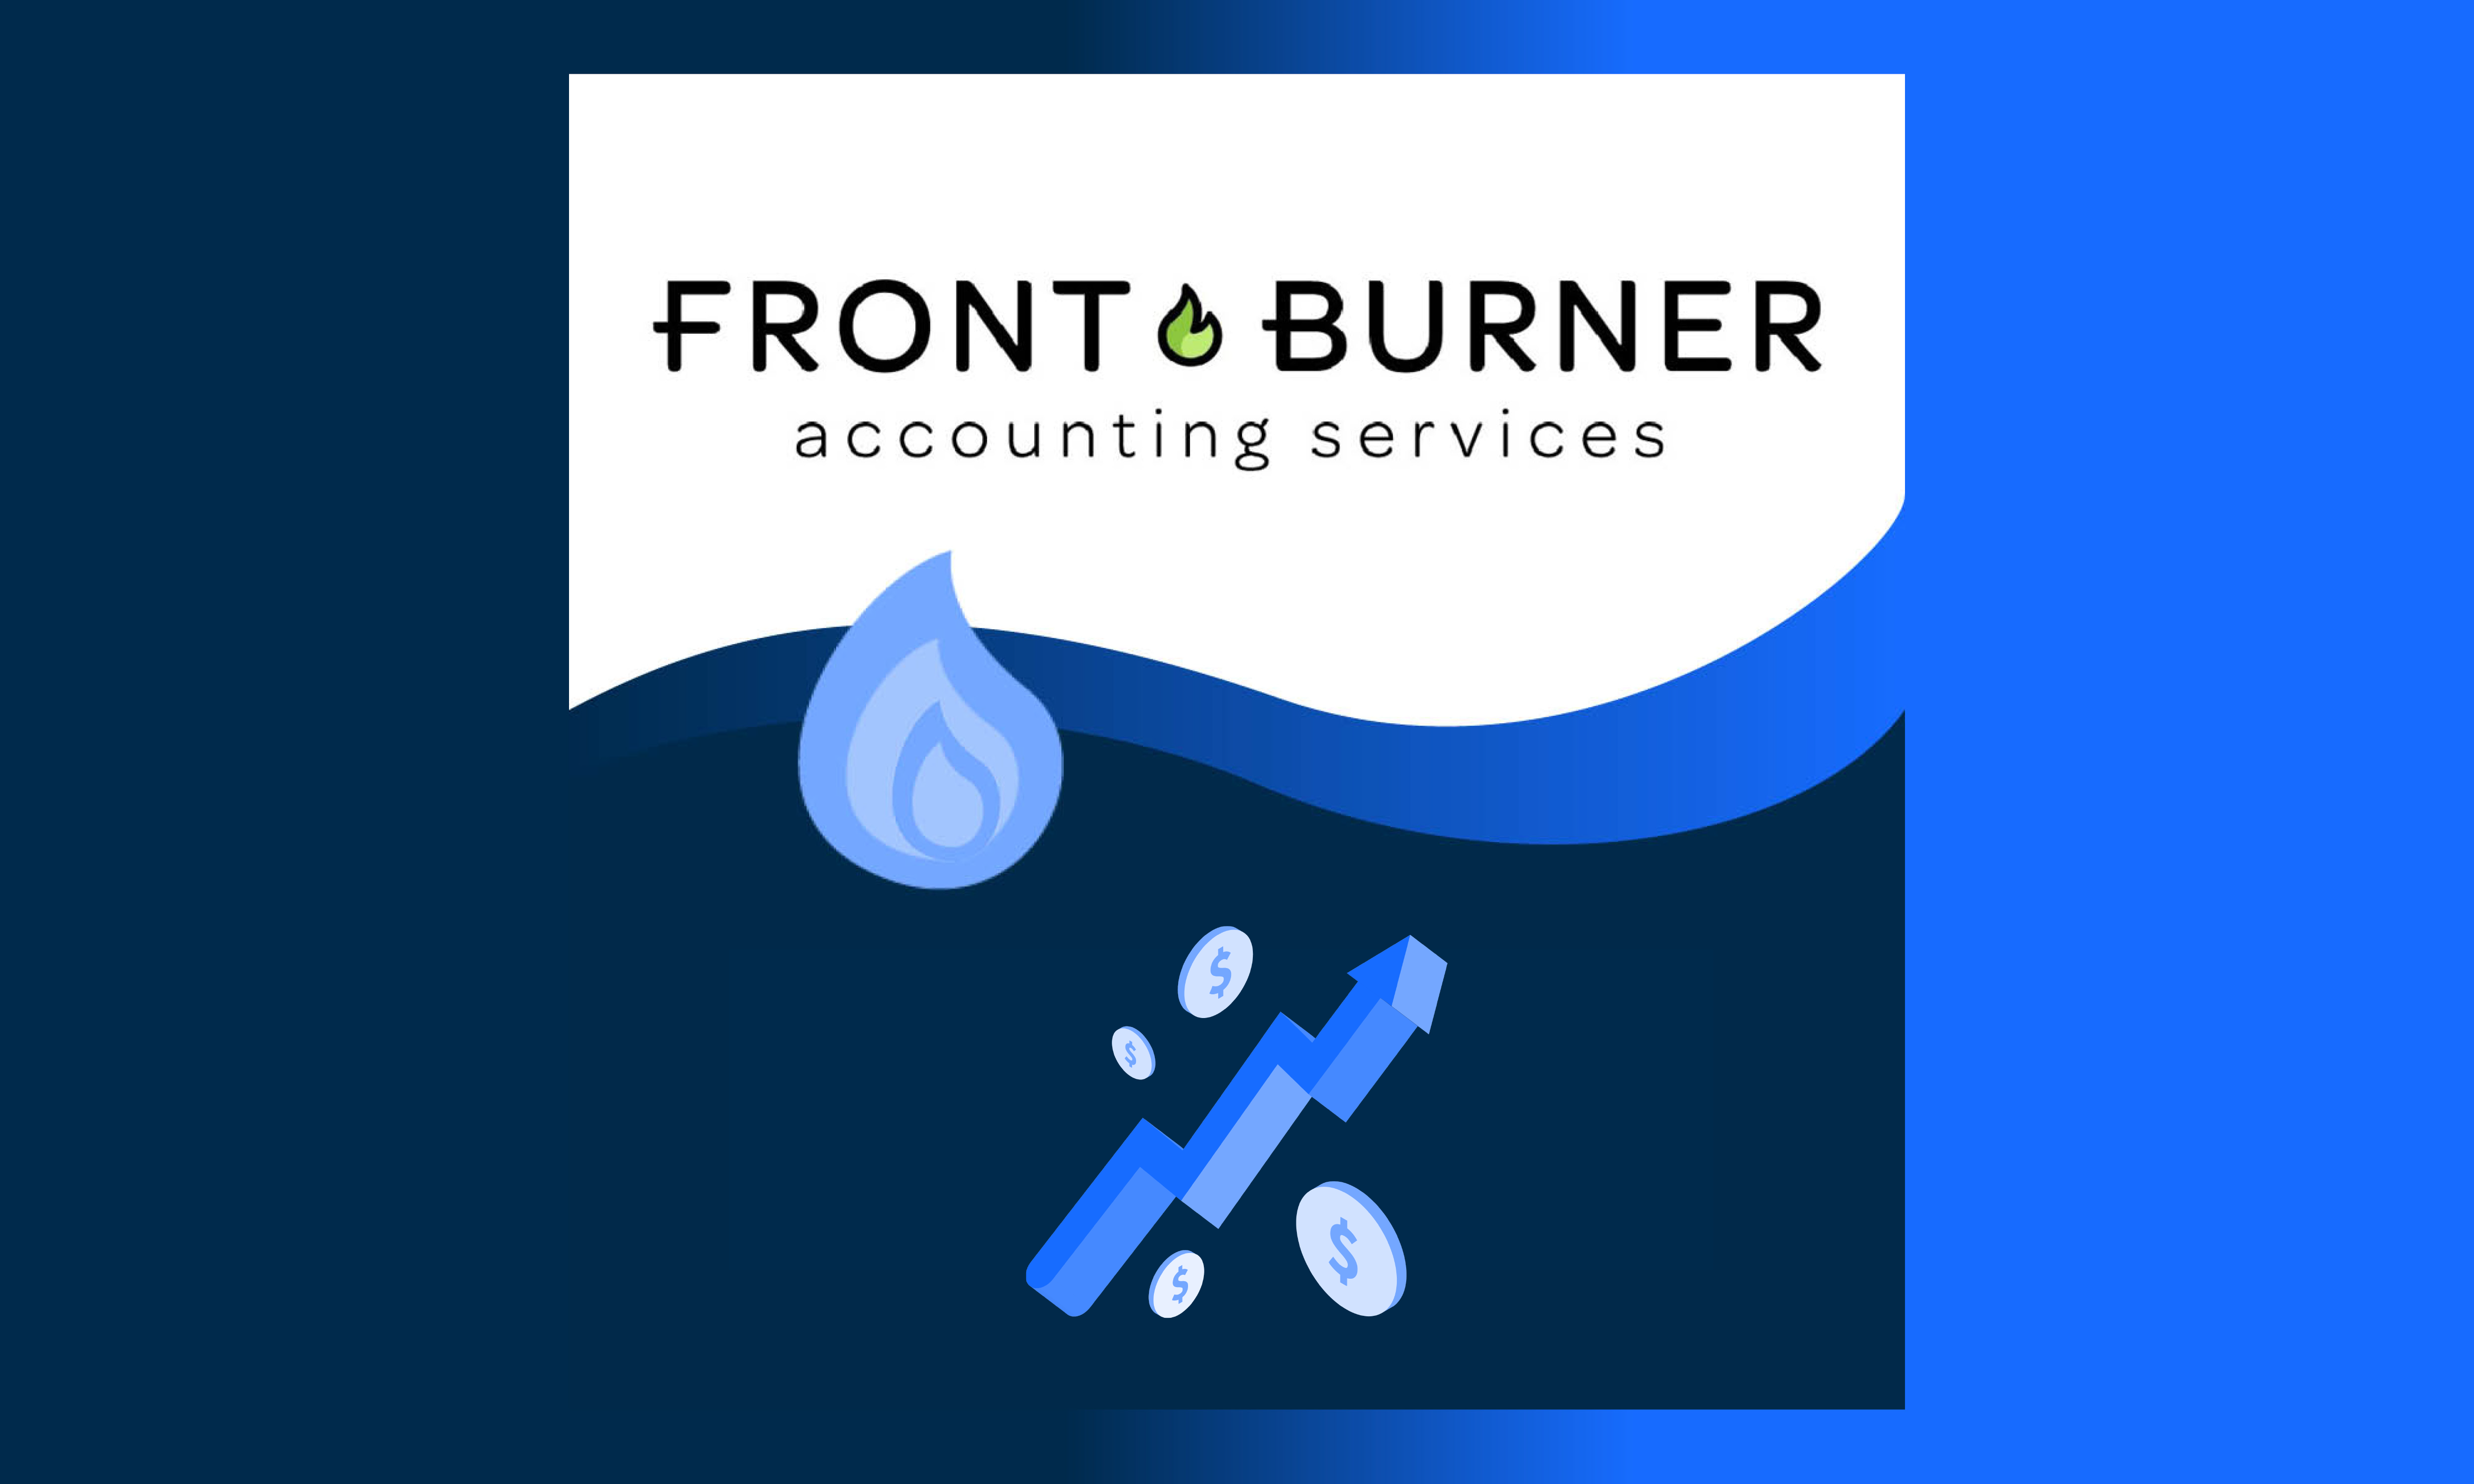 Front Burner provides financial management services to hospitality businesses.